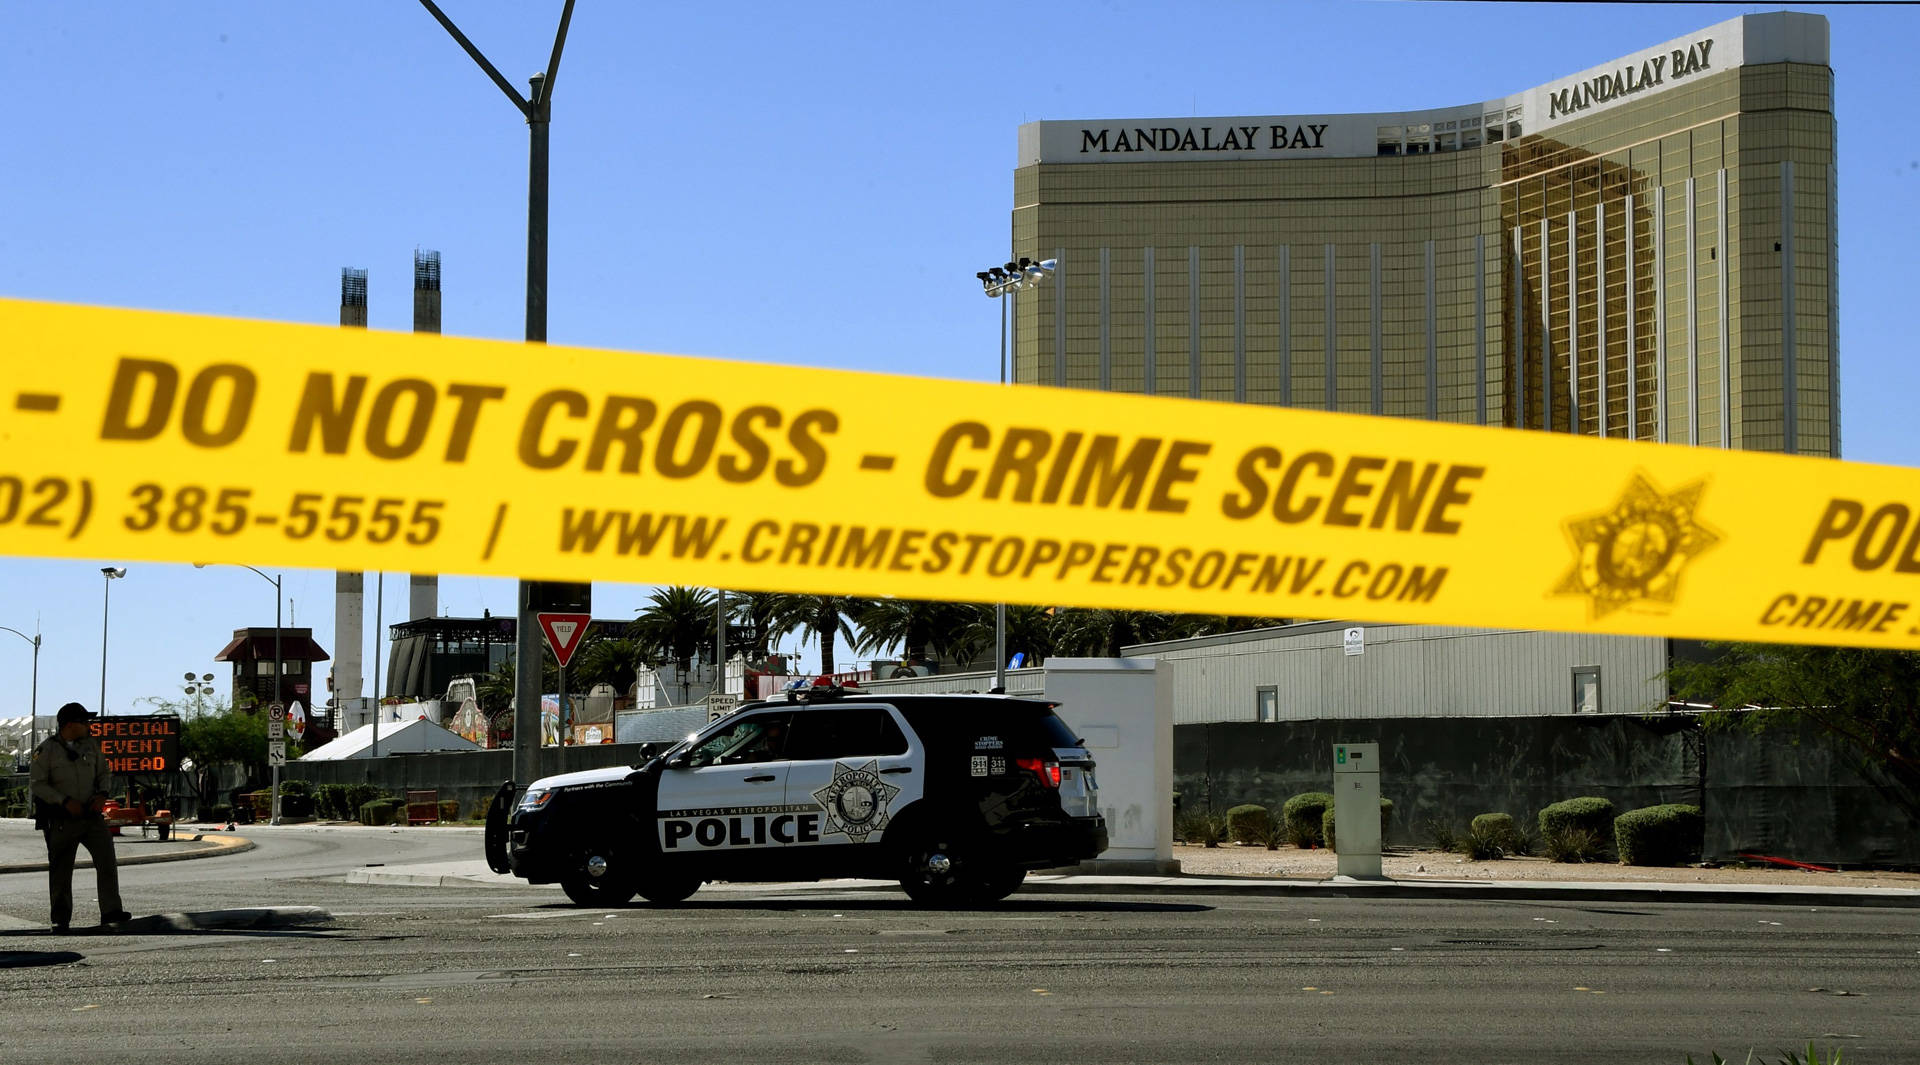 Crime scene tape surrounds the Mandalay Bay Hotel in Las Vegas, from which 64-year-old Stephen Paddock shot and killed at least 58 people and wounded more than 500 others Sunday night. Damage to the shooter's 32nd-floor window can be seen at top right. MARK RALSTON/AFP/Getty Images